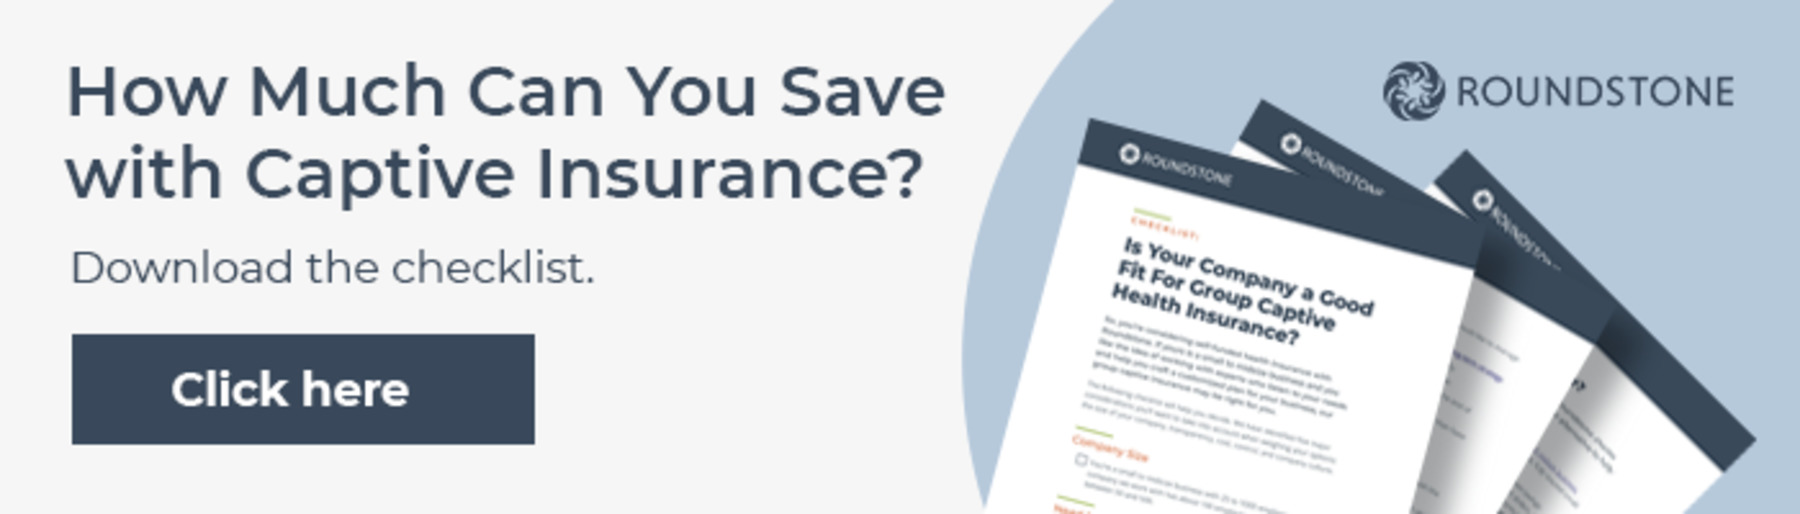 How-Much-Can-You-Save-with-Captive-Insurance_1800x